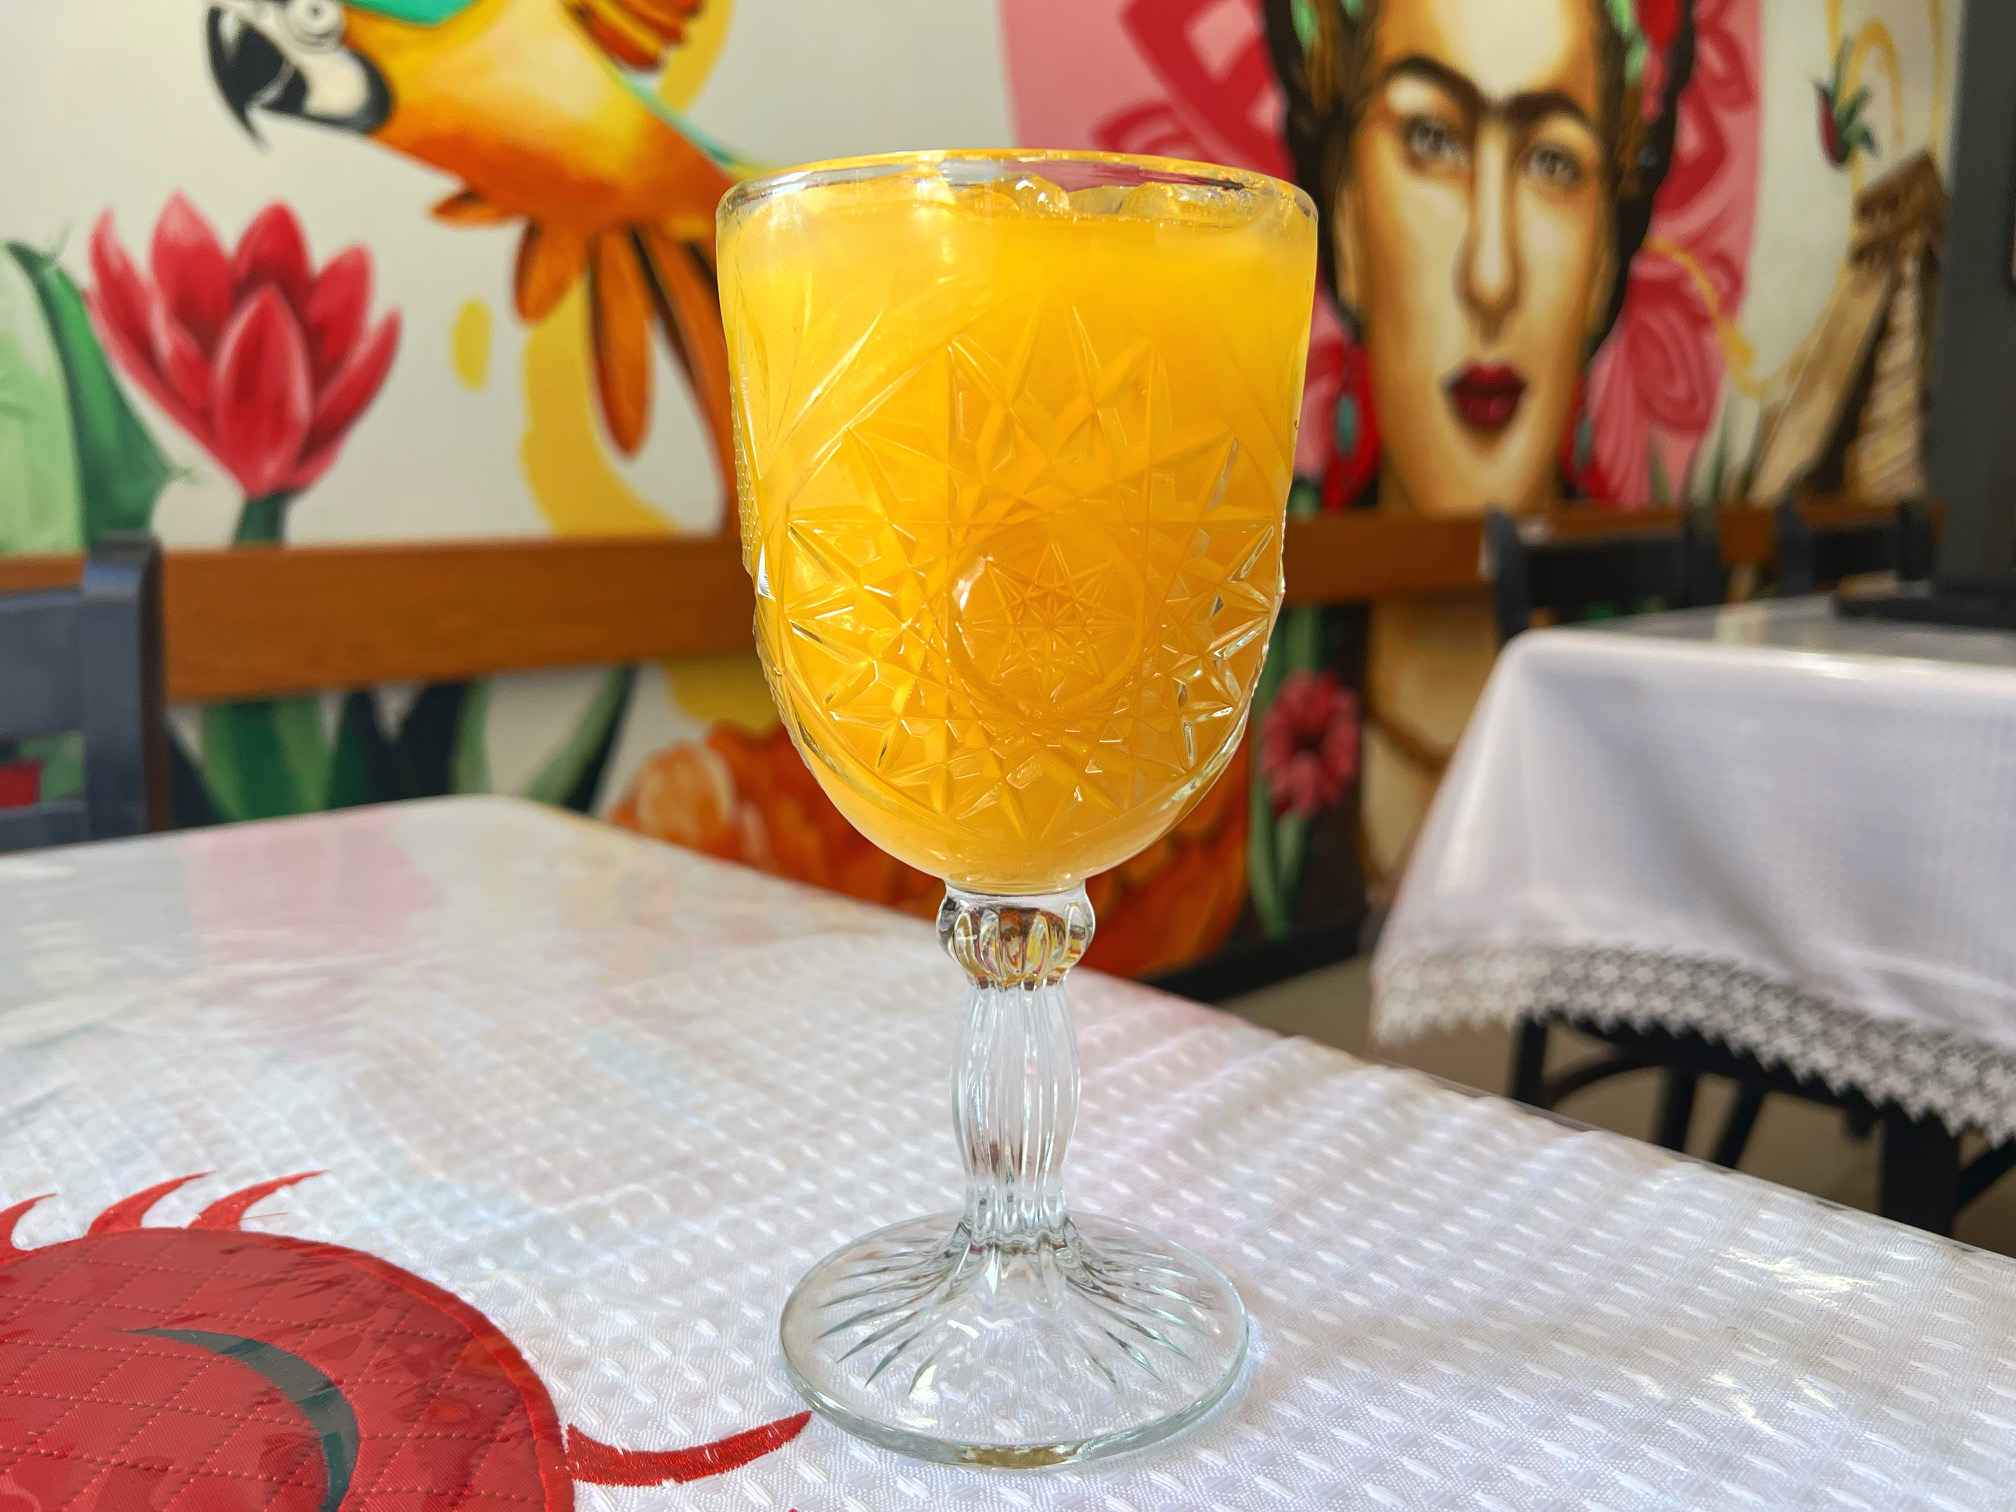 On a white tableclothed table, there is a glass goblet with an orange mango margarita. In the background, there are two colorful murals on La Bahia Grill's dining room walls. Photo by Alyssa Buckley.